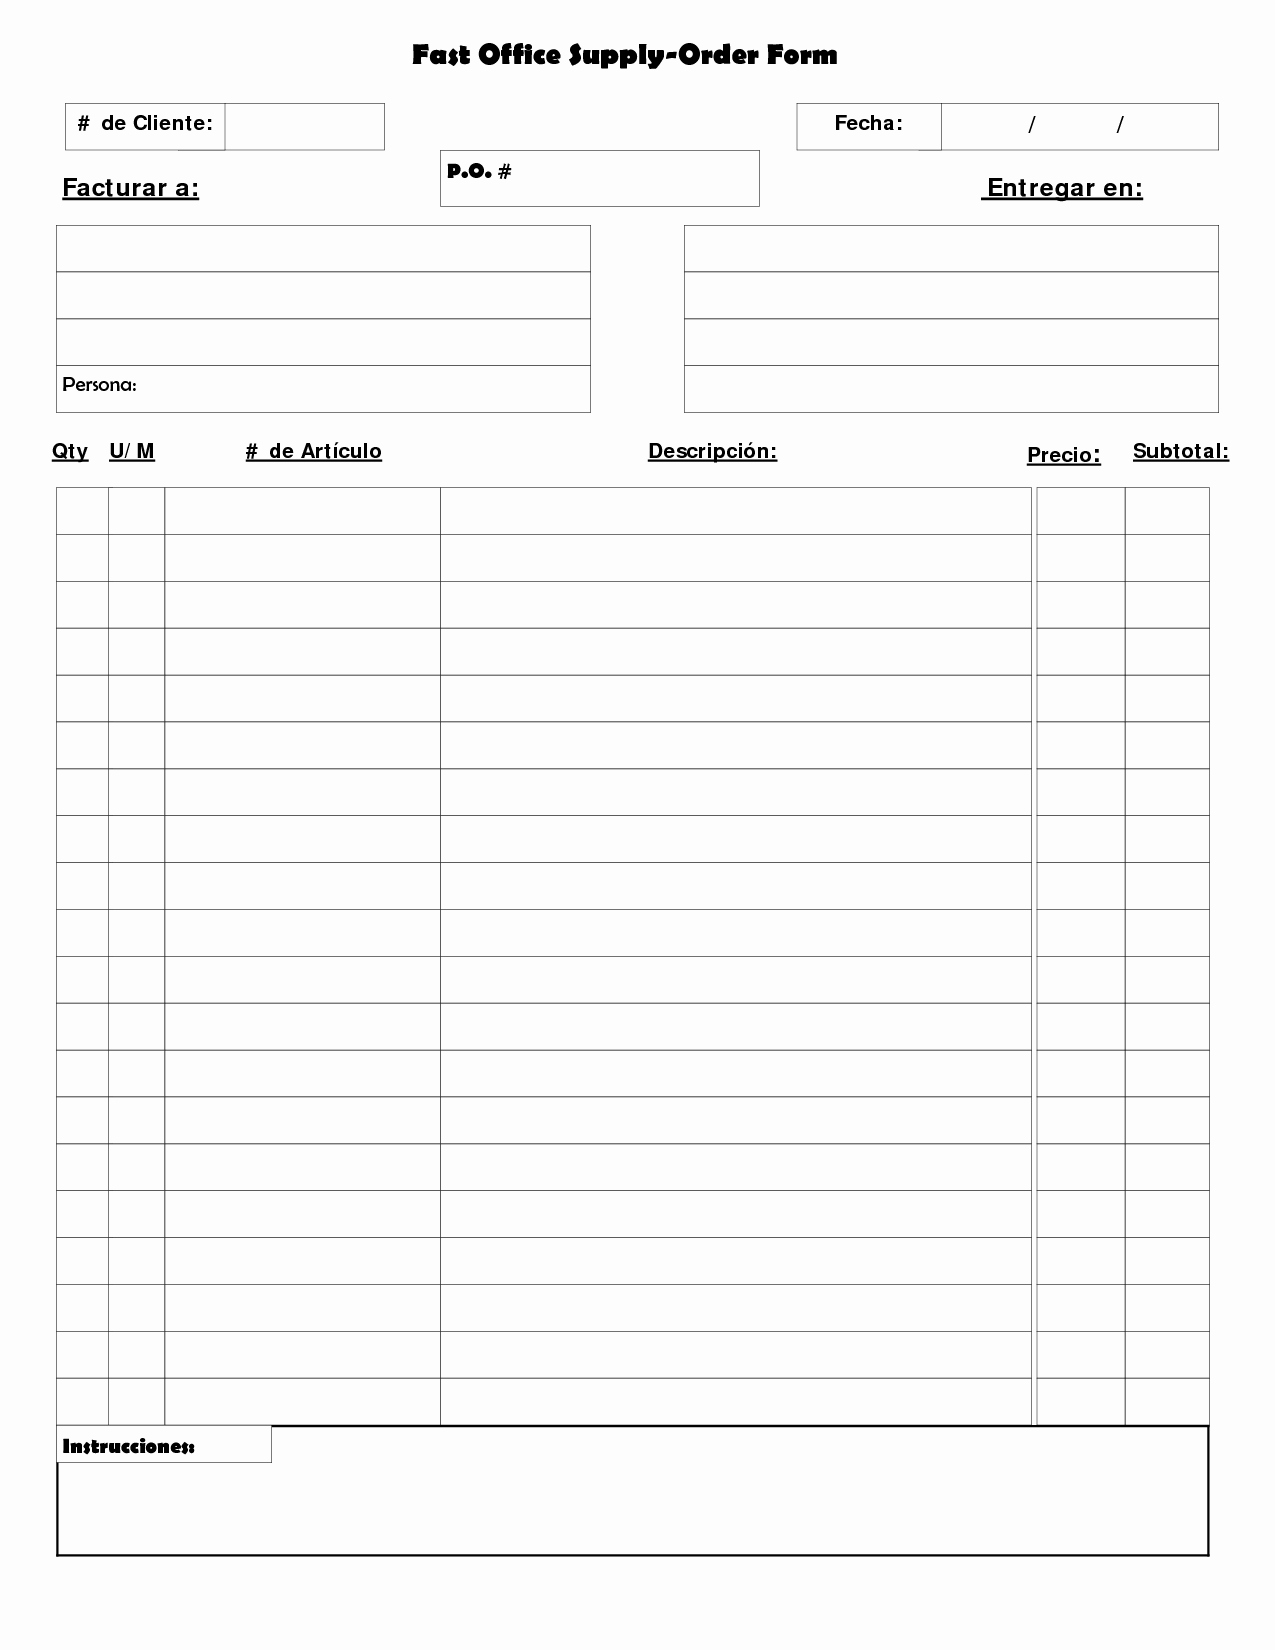 Supply order form Template Awesome Best S Of Fice Supply order form Template Fice Supply order form Fice Supply order